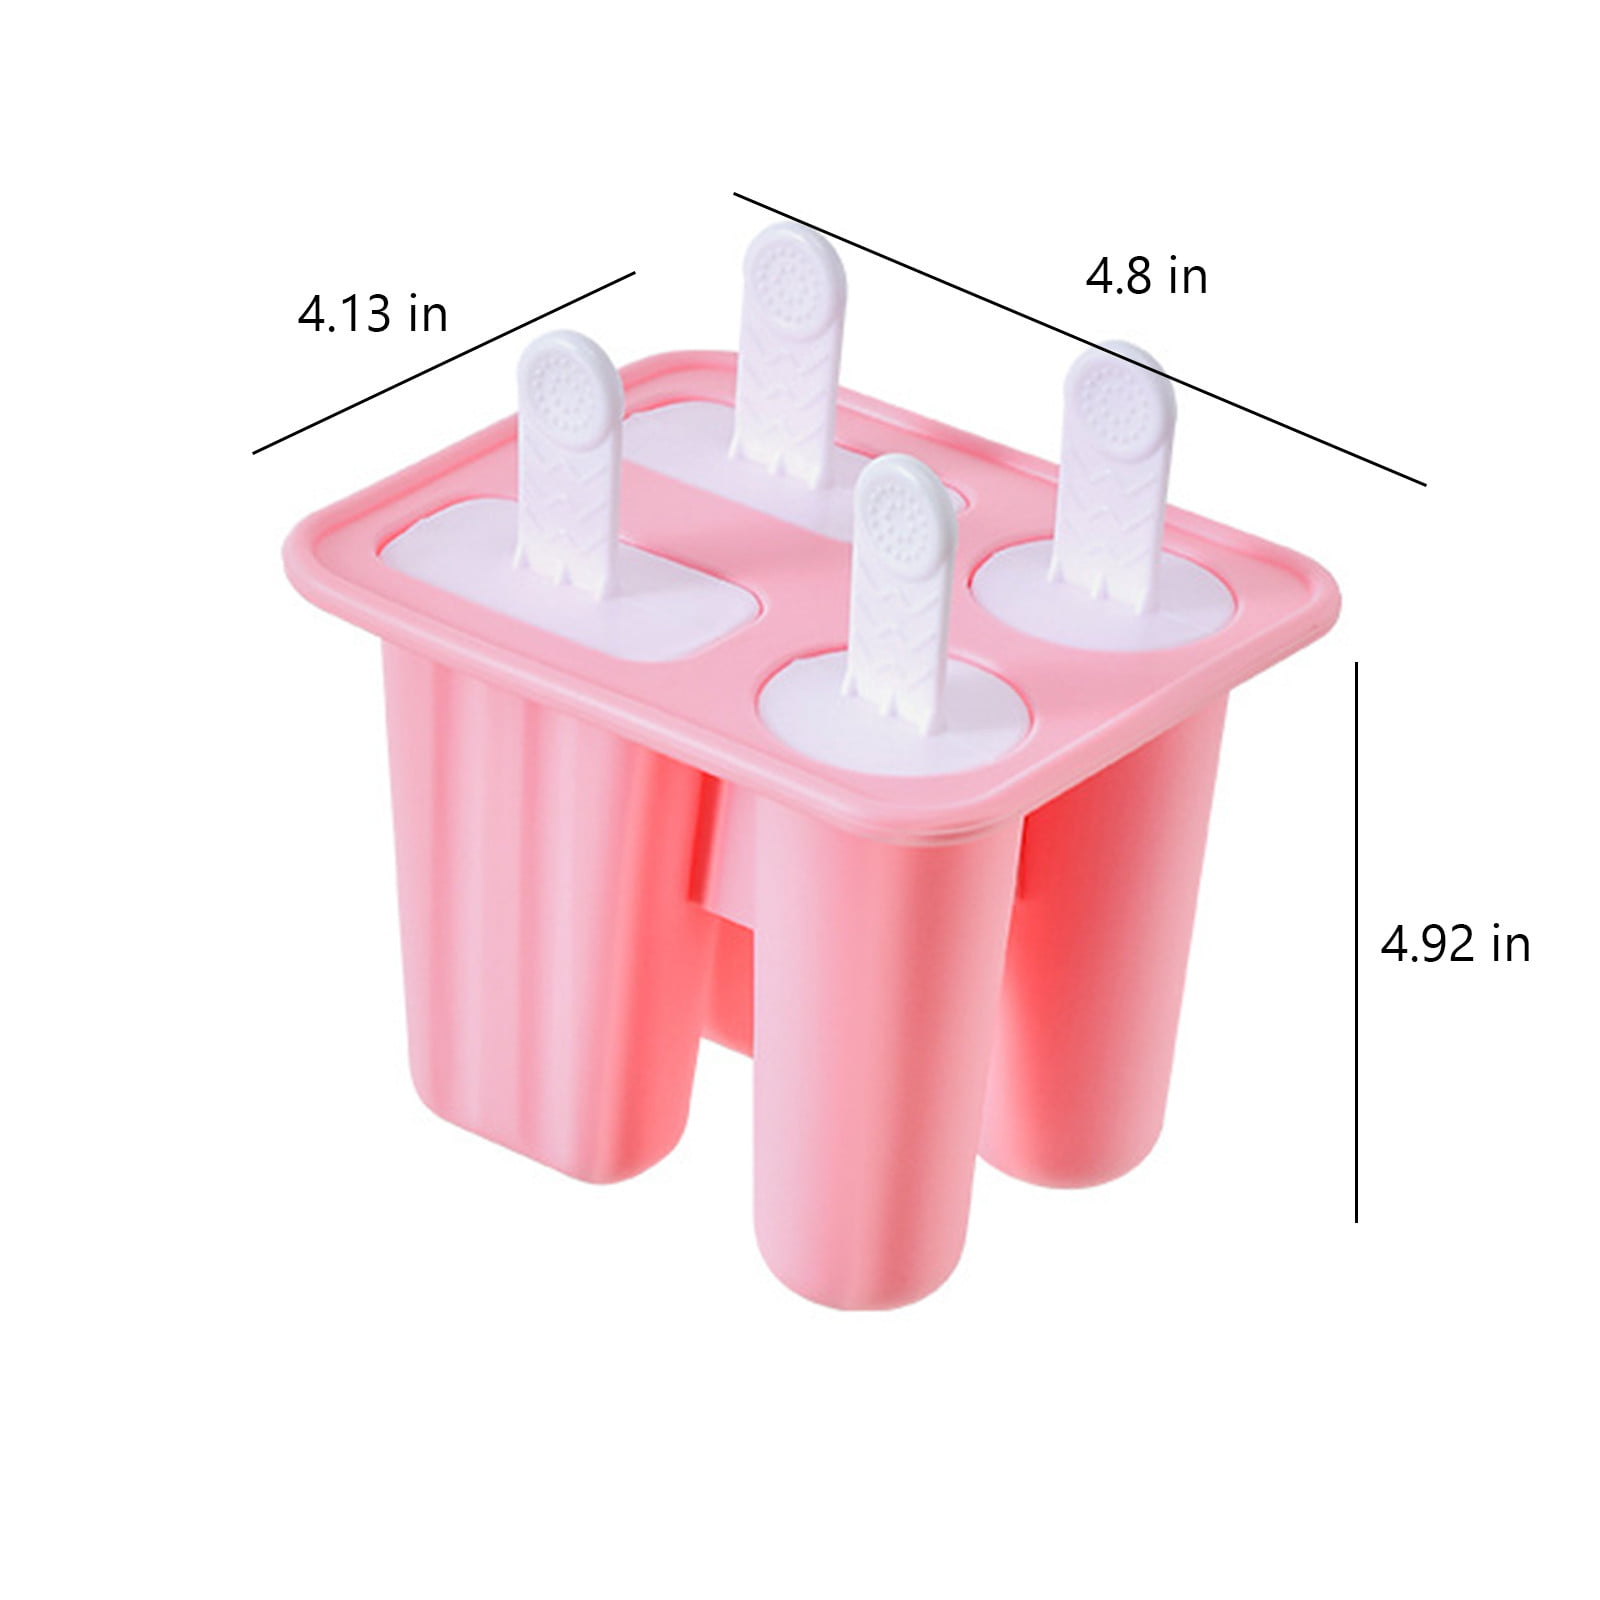 Katieyca Ice Pop Molds 2 Pack Easy Release Ice Cream Mold,Fun Popsicles Molds Silicone Reusable Cartoon Animal Cute Ice Molds for Kids with Cover with 12